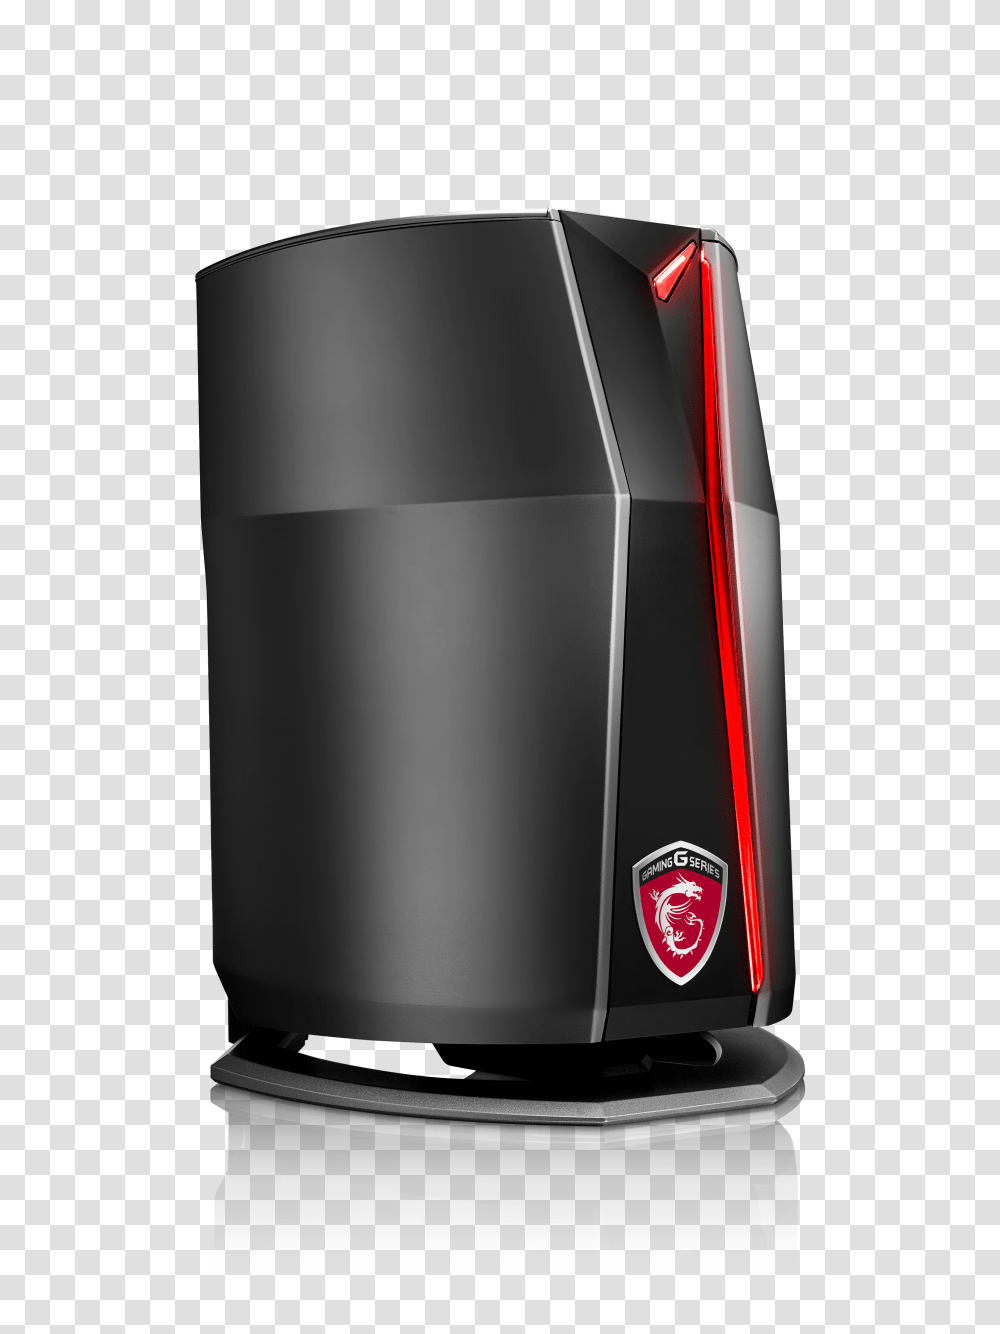 Msi Vortex Gaming Pc Thunderbolt Technology Community, Appliance, Heater, Space Heater, Dishwasher Transparent Png